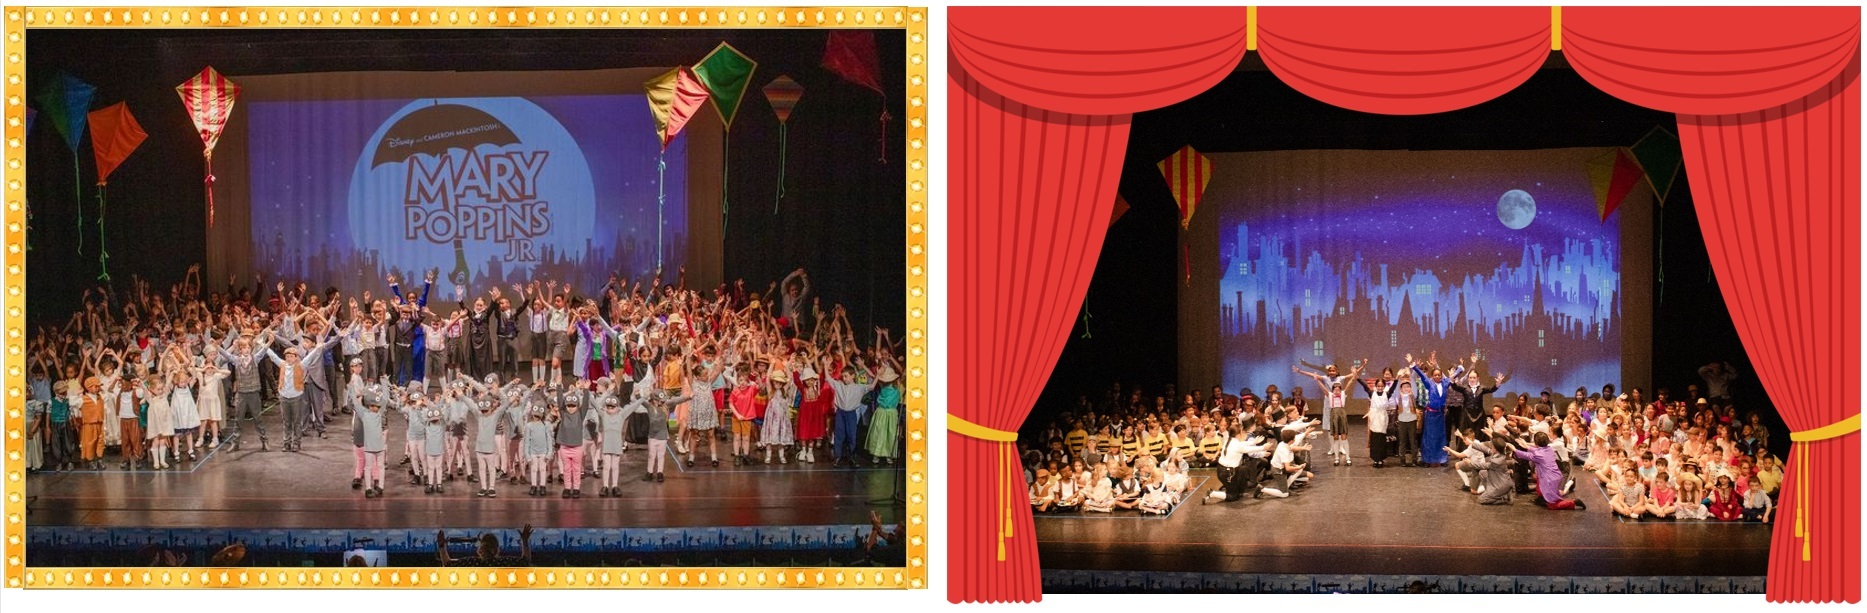 Mary Poppins   blog pic 1   first pic of whole school